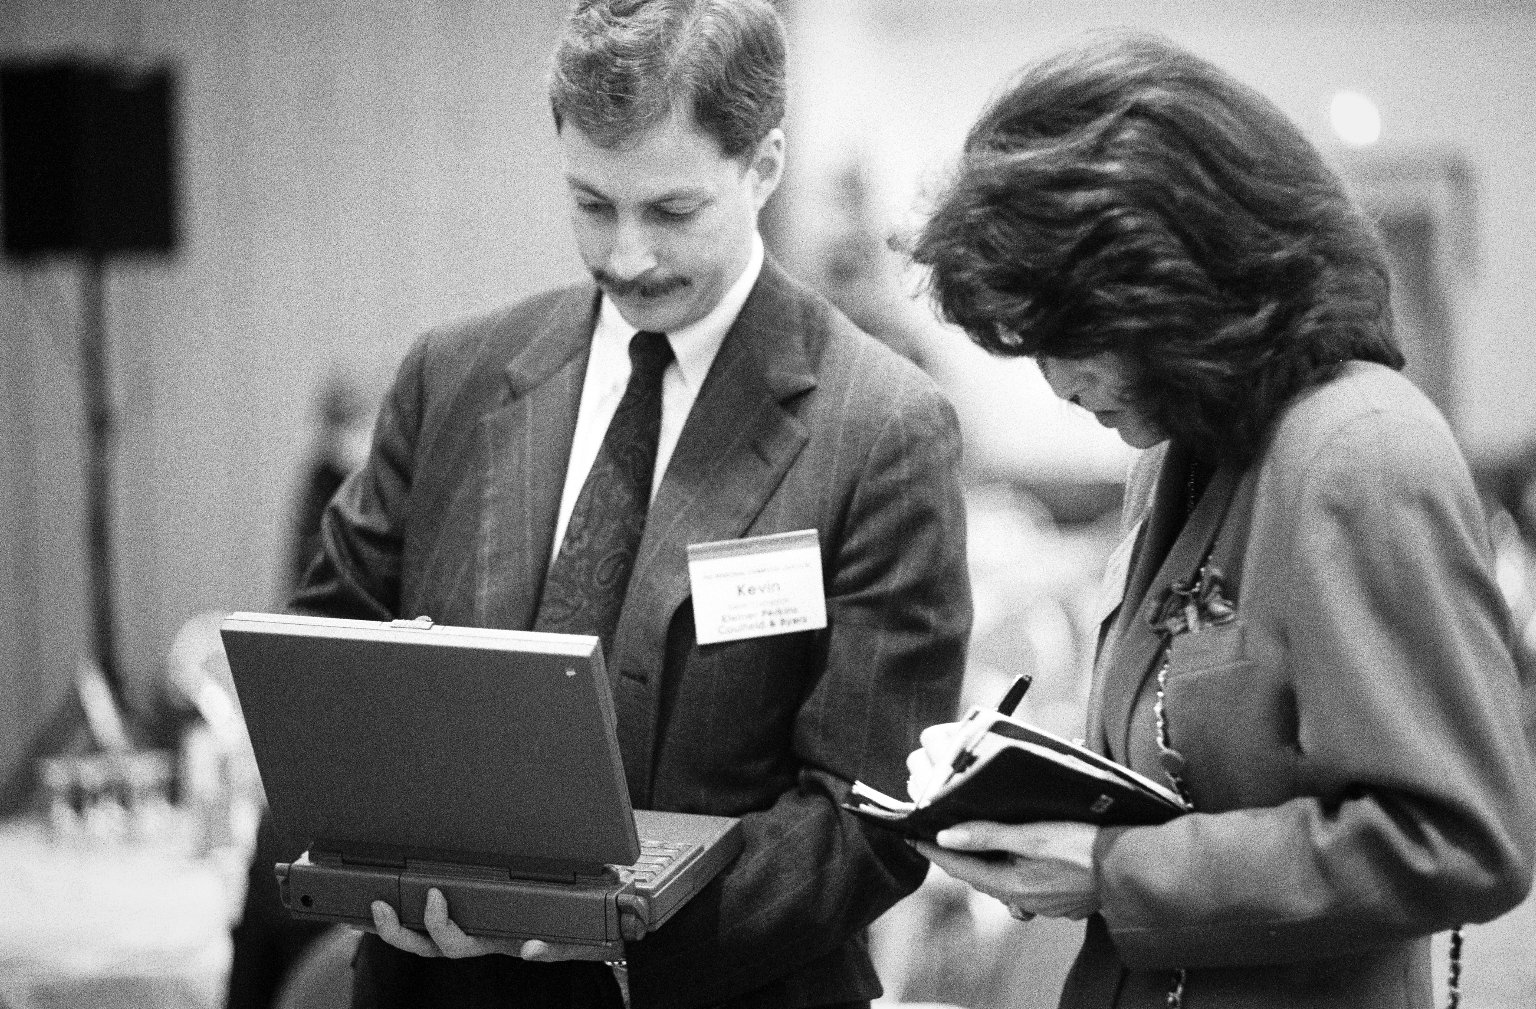 Kevin Compton of Kleiner Perkins (left) and an unidentified female colleague.